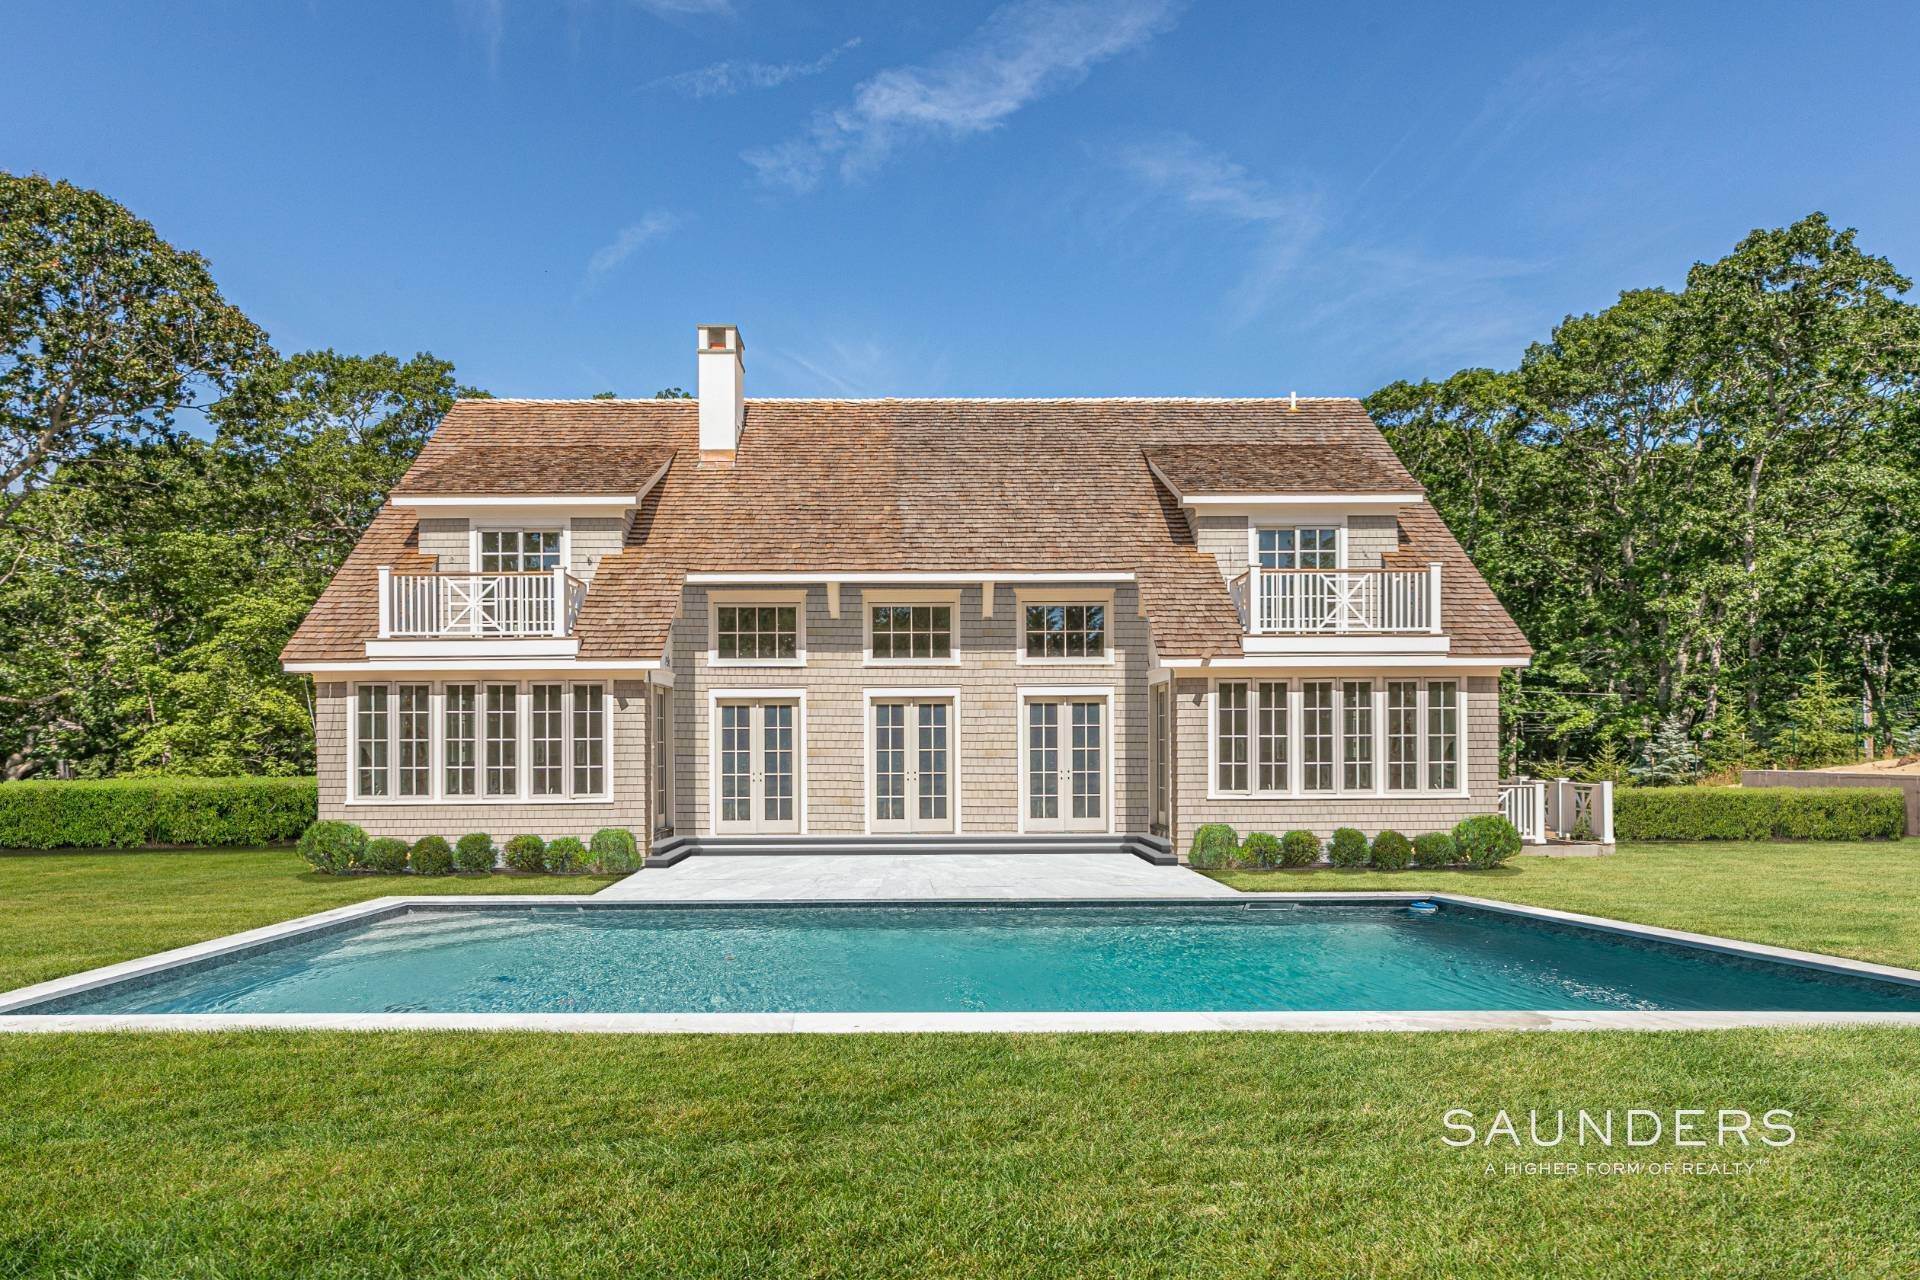 2. Single Family Homes for Sale at New Construction On East Hampton's Cove Hollow 58 Cove Hollow Road, East Hampton, NY 11937